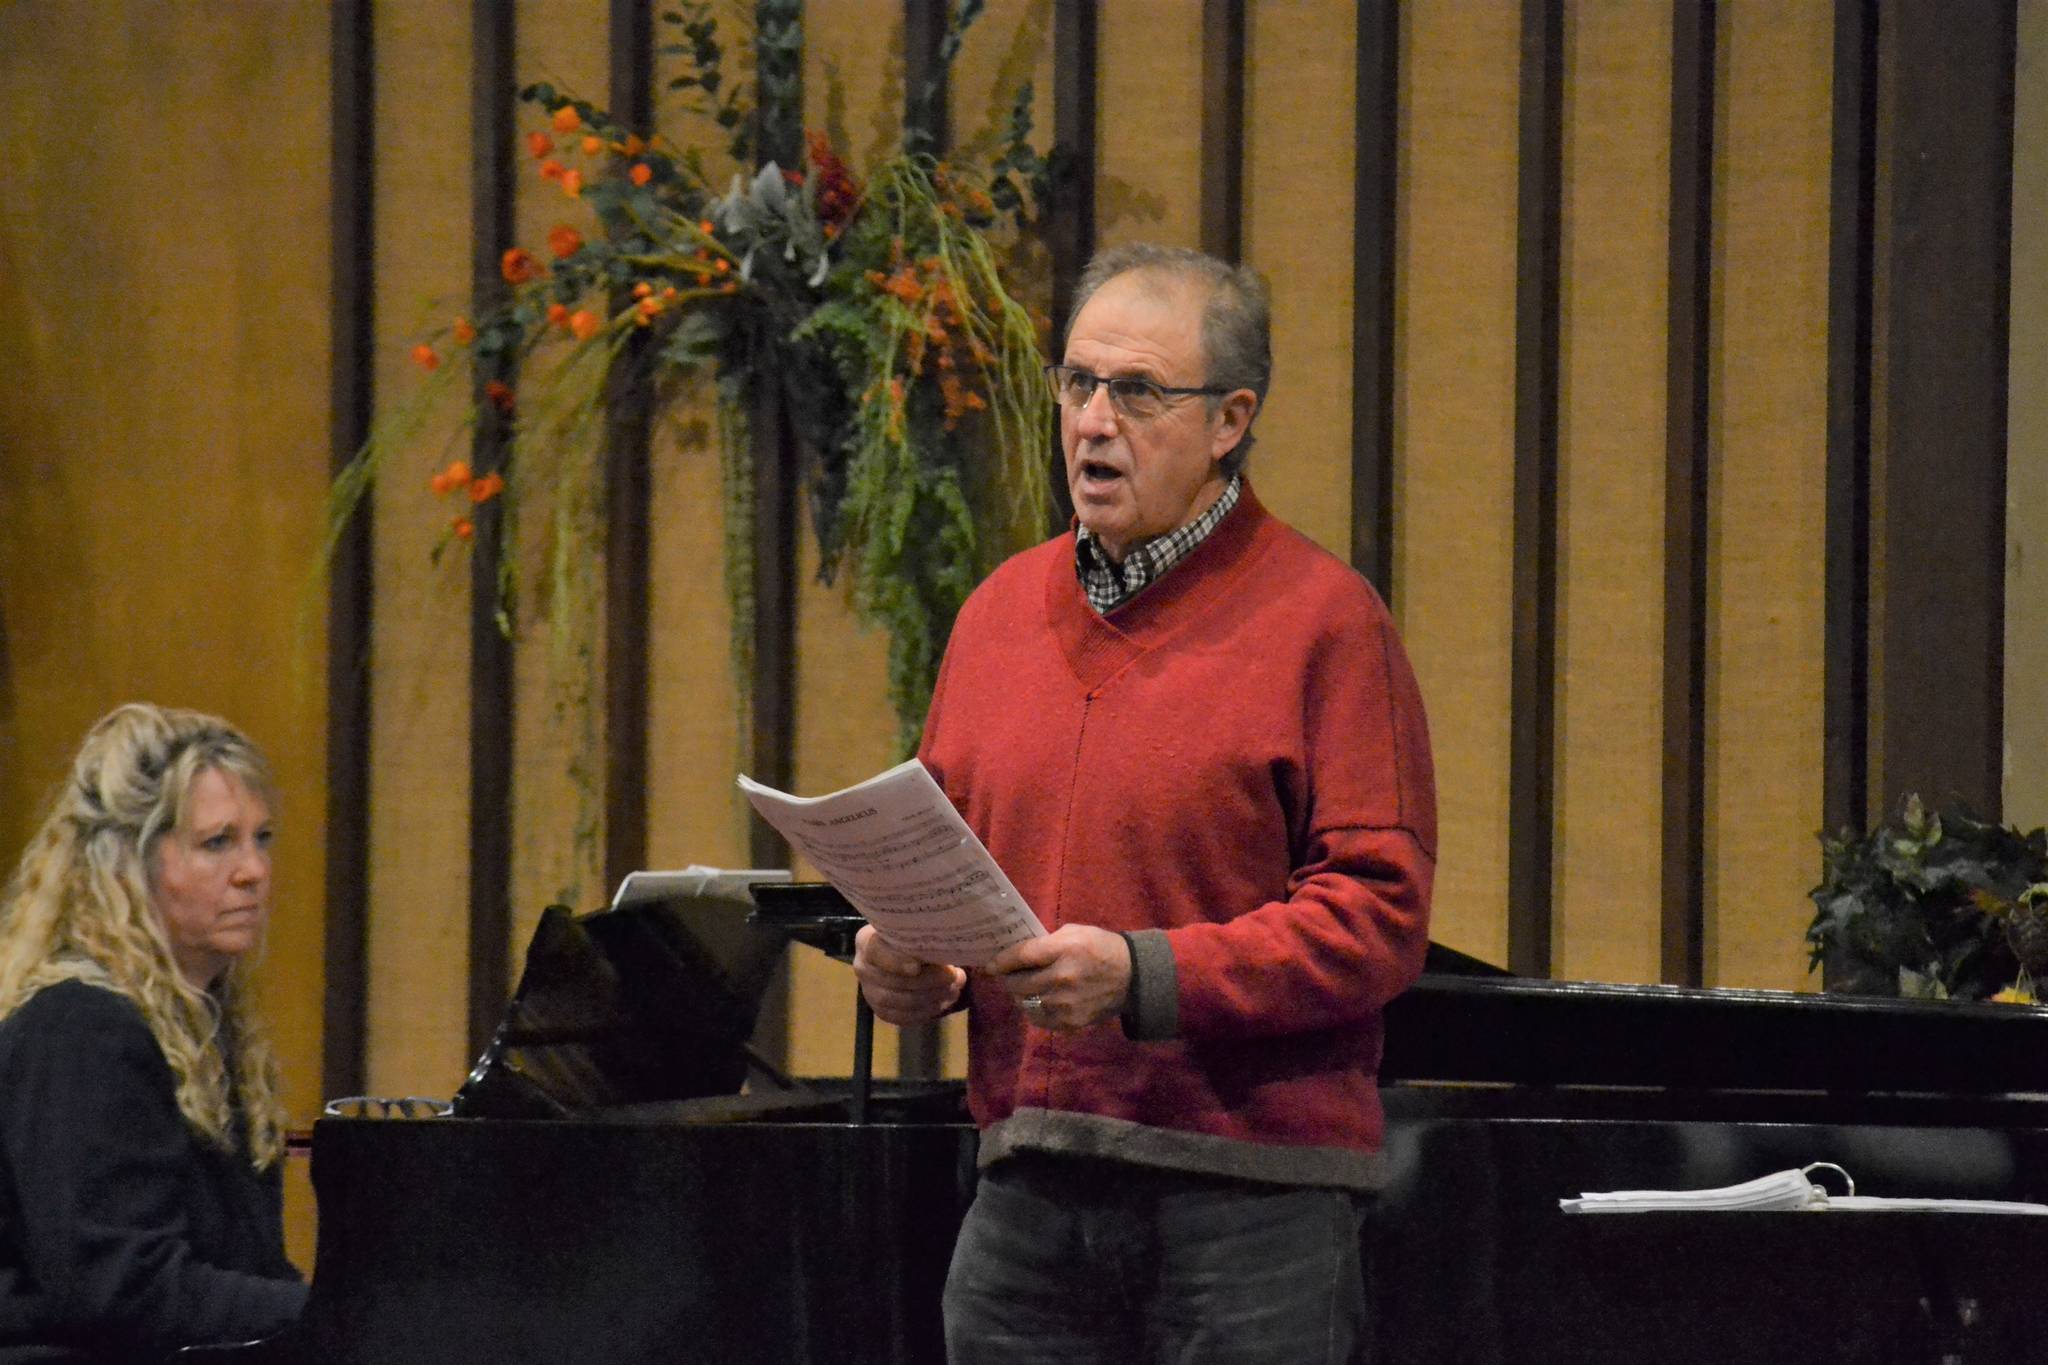 Rob Pluymen, a retired professional singer in Europe, sings two solos of “Ave Maria” and “Panis Angelicus” for two performances with the Sequim Community Christmas Chorus on Dec. 6-7. Kyra Humphrey will sing “Panis Angelicus” on Sunday, Dec. 8, and Patty Shoop will sing “Ave Maria.” Sequim Gazette photo by Matthew Nash